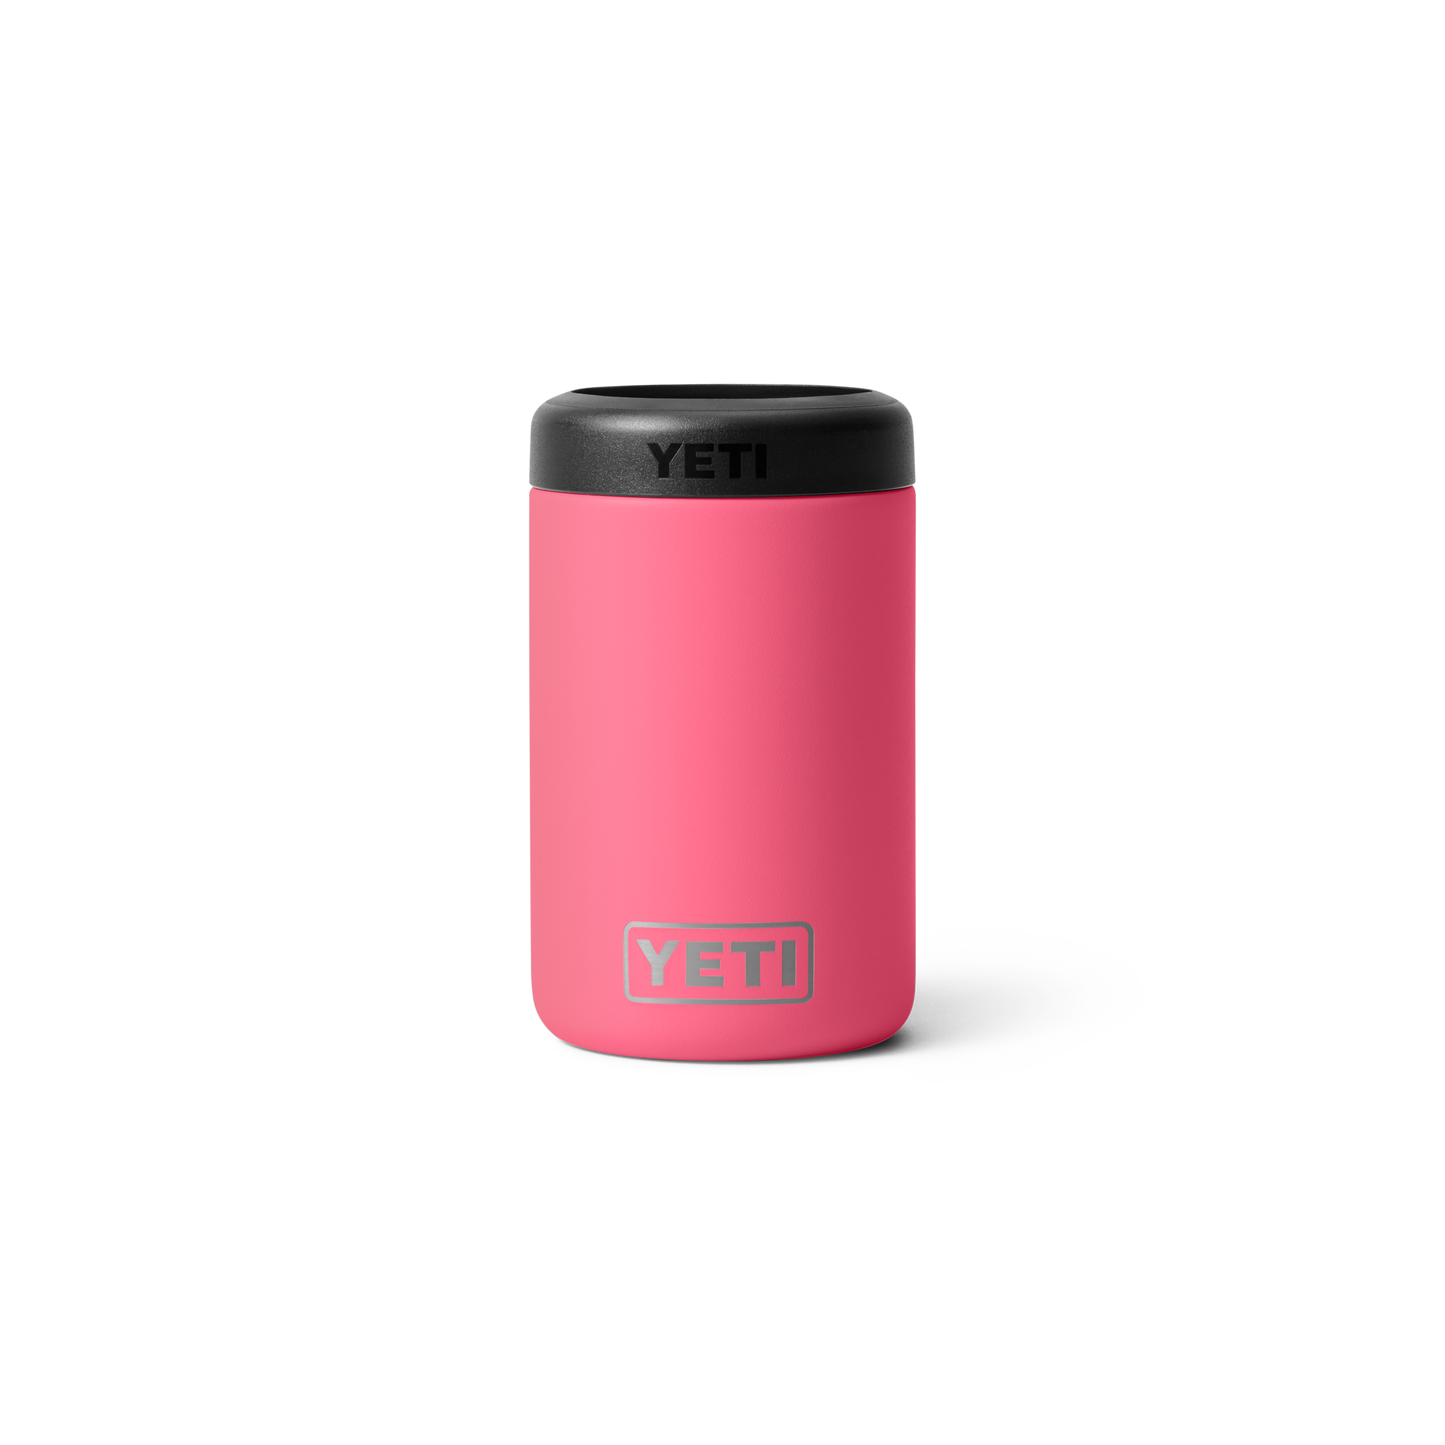 Colster® Insulated Can Cooler (330ml)